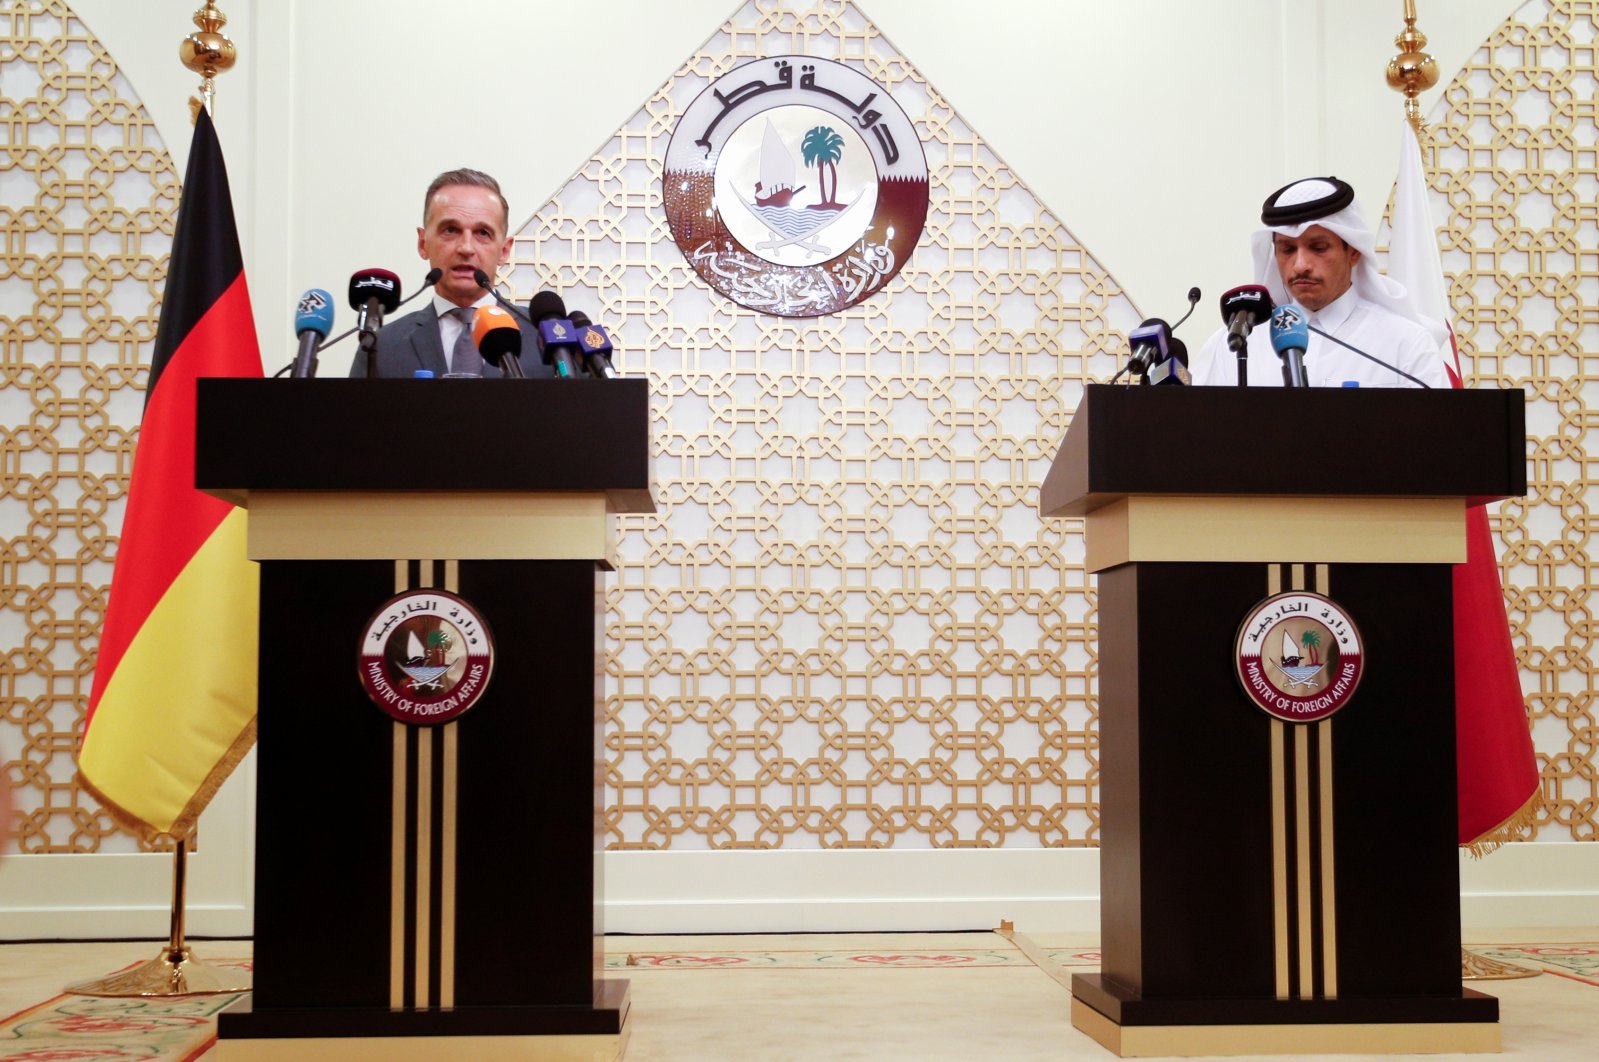 German Foreign Minister Heiko Maas and Qatar's Foreign Minister Mohammed bin Abdulrahman bin Jassim Al Thani attend a press conference in Doha, Qatar, Aug. 31, 2021. (Reuters Photo)